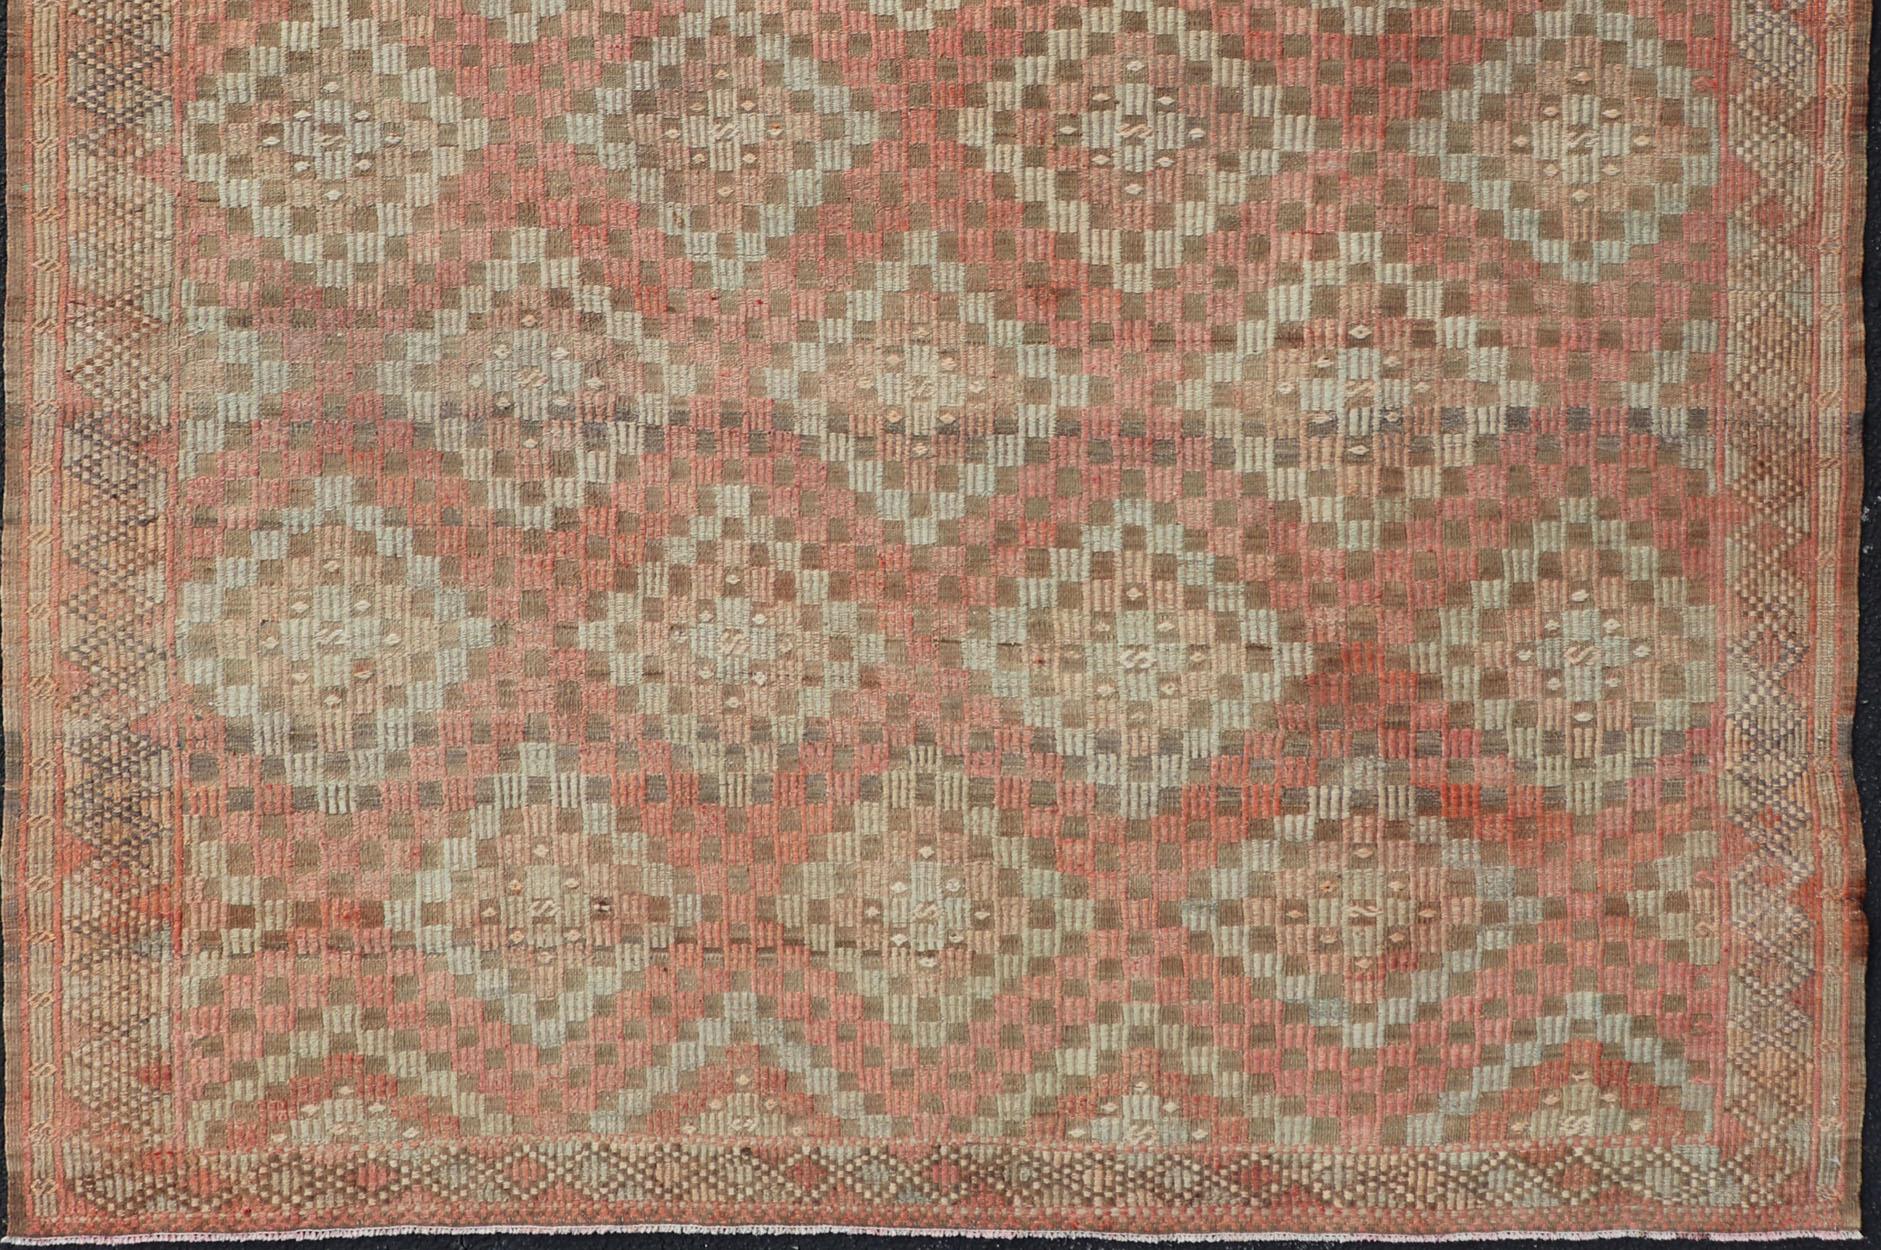 Colorful Vintage Turkish Embroidered Flat-Weave in Diamond Design in Orange In Good Condition For Sale In Atlanta, GA